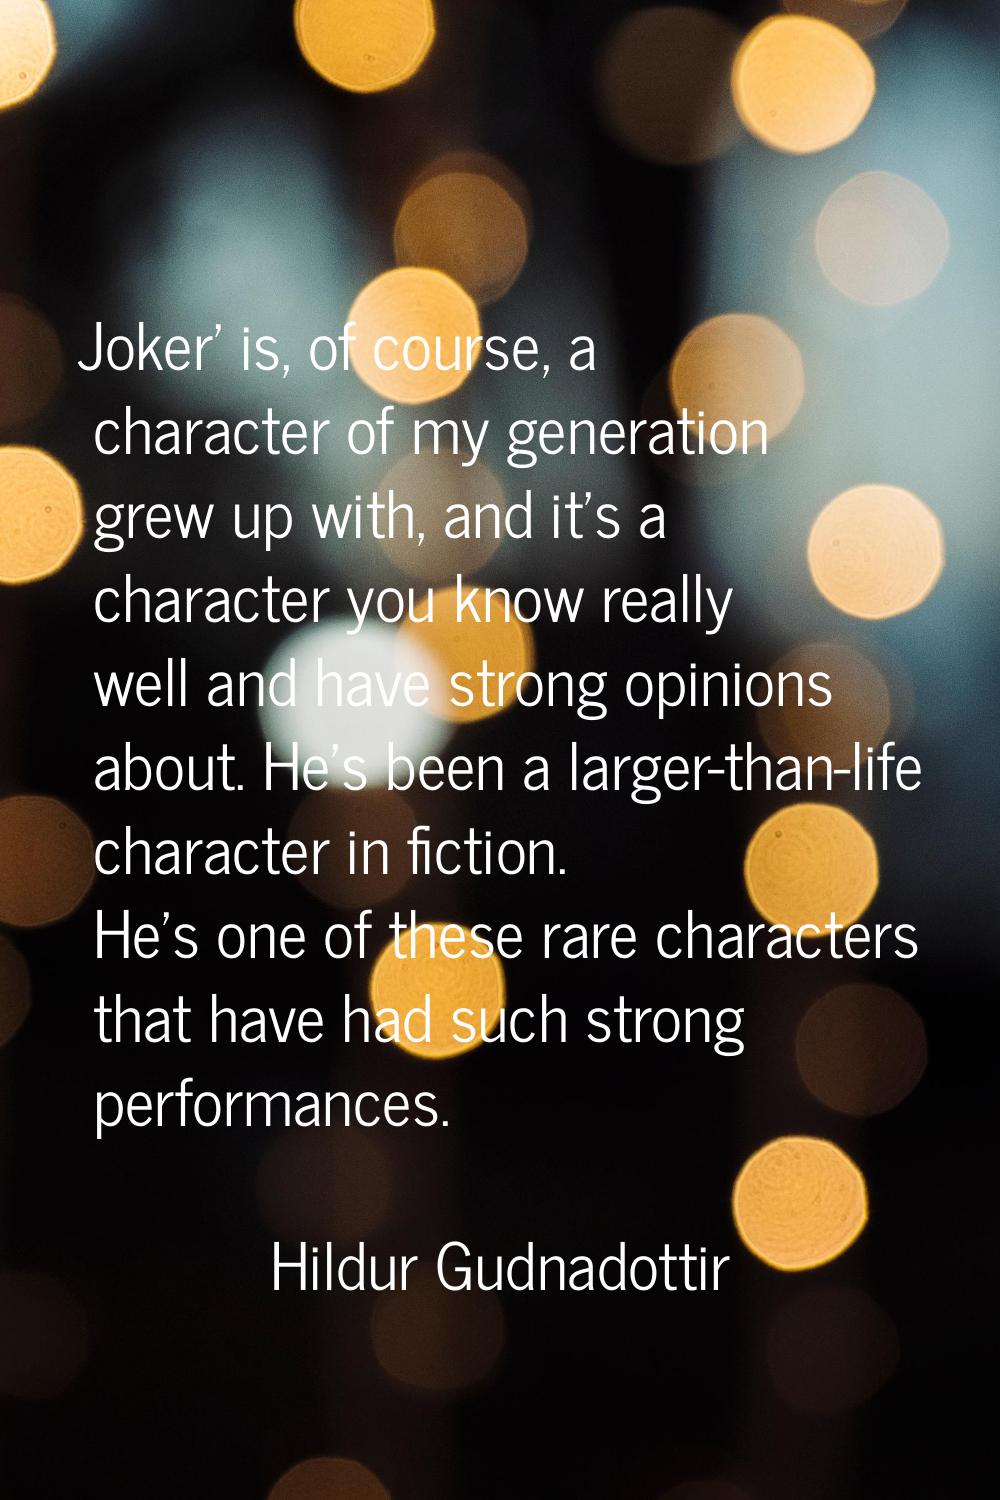 Joker' is, of course, a character of my generation grew up with, and it’s a character you know real